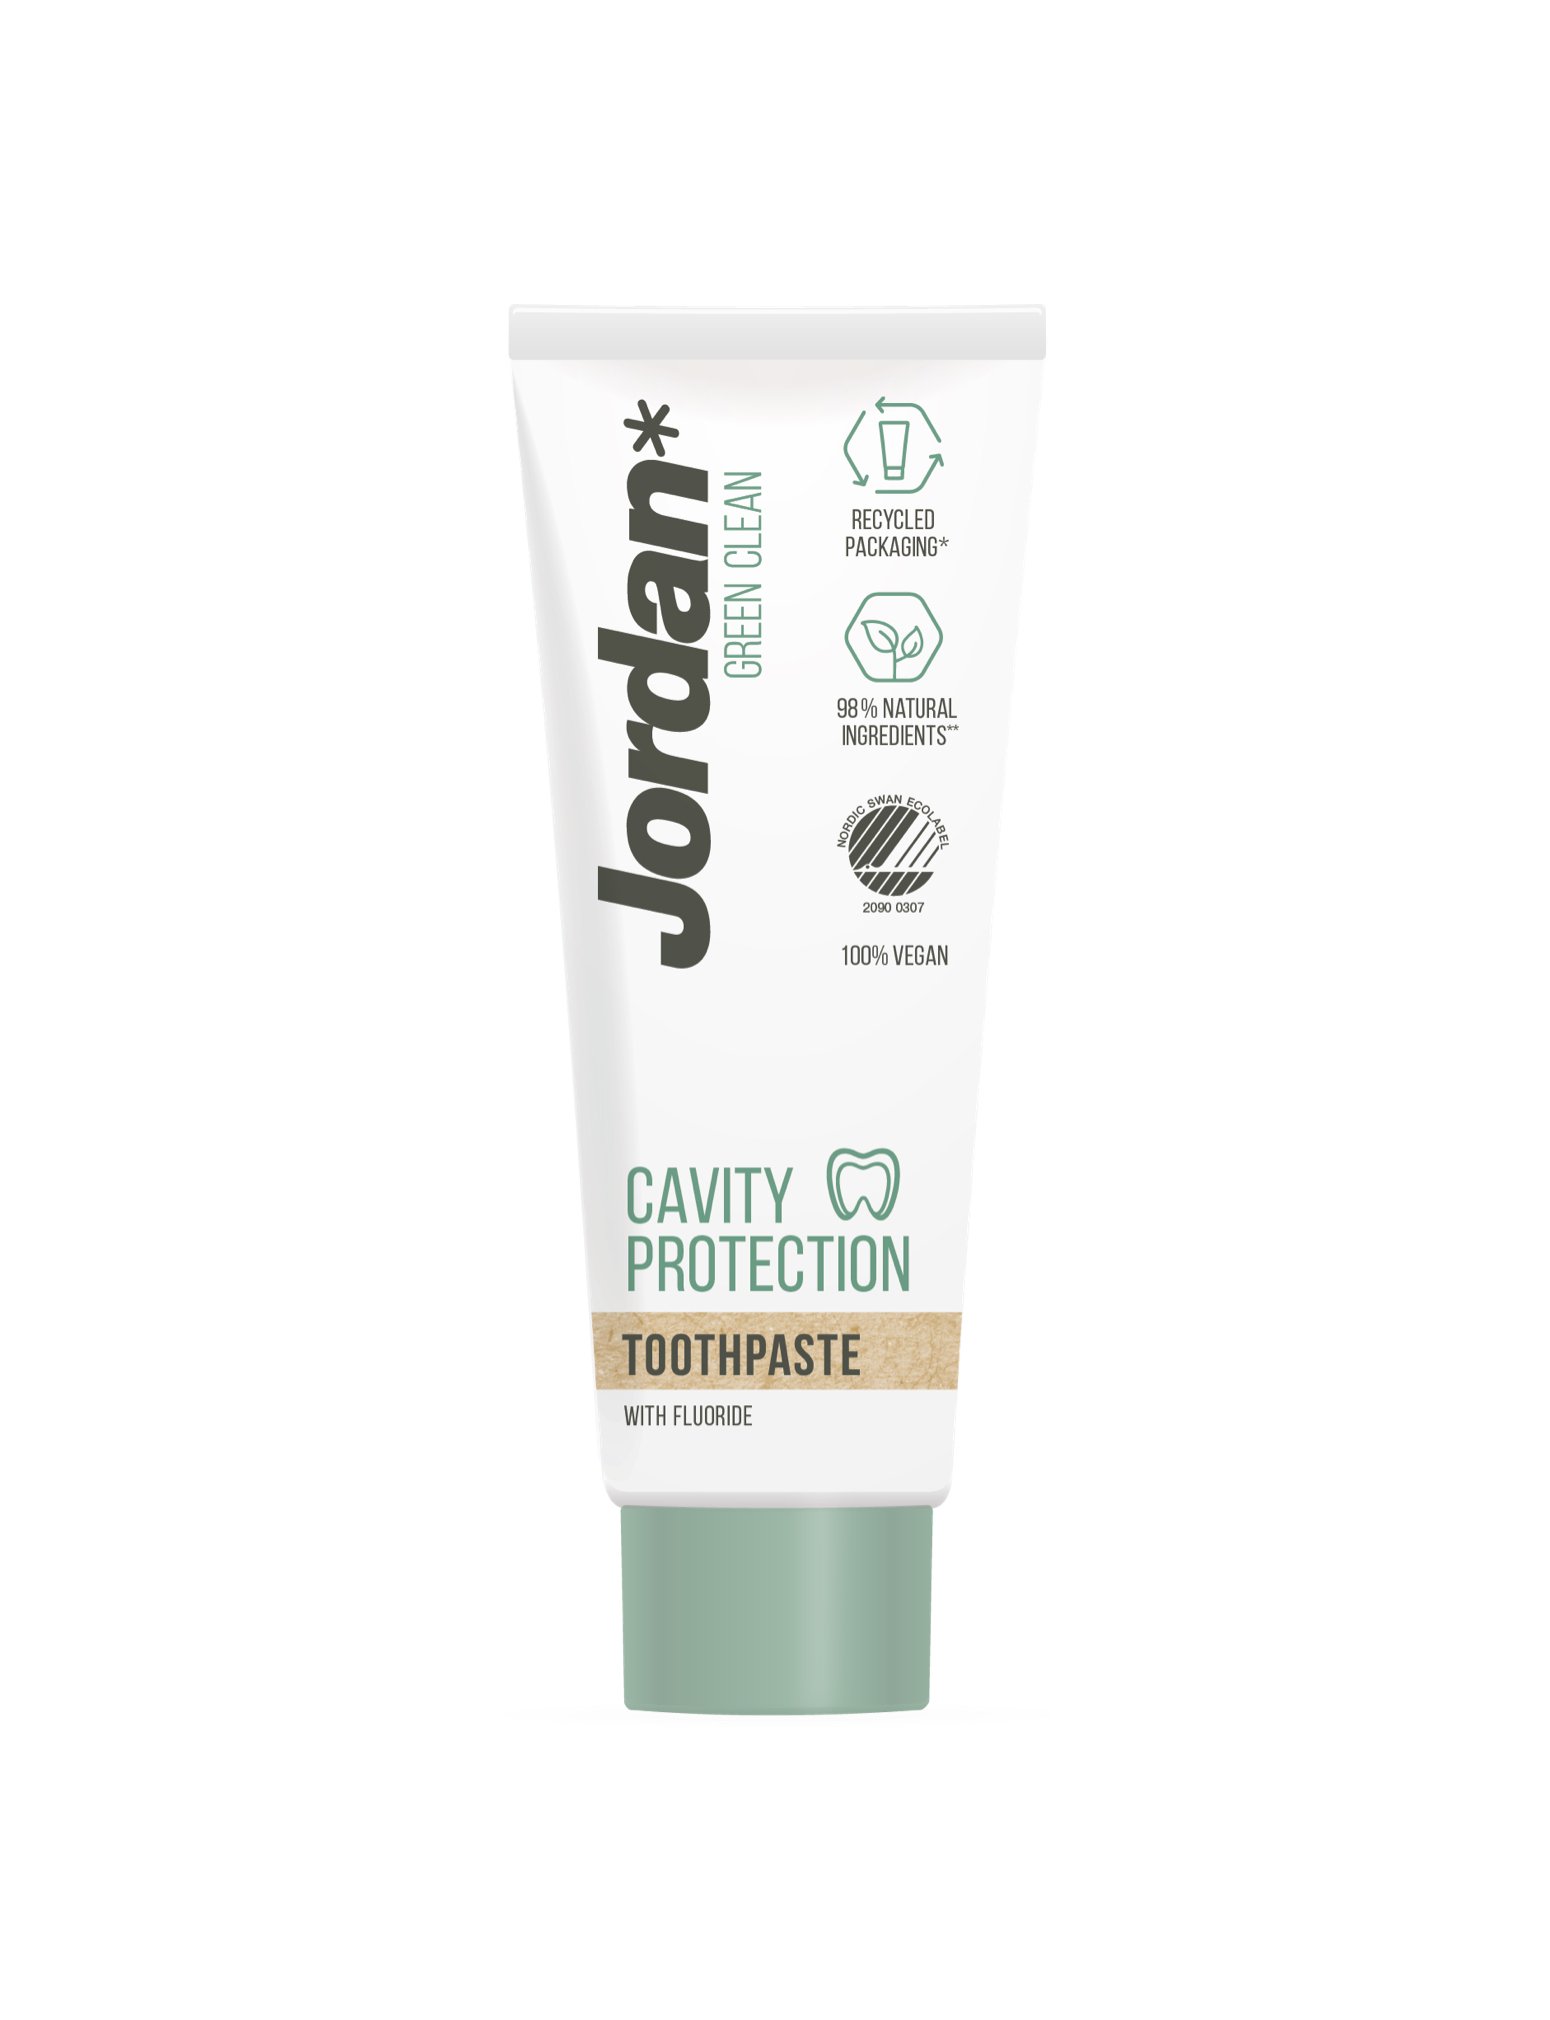 Jordan Green Clean Toothpaste 75ml (Adult) - Cavity Protection